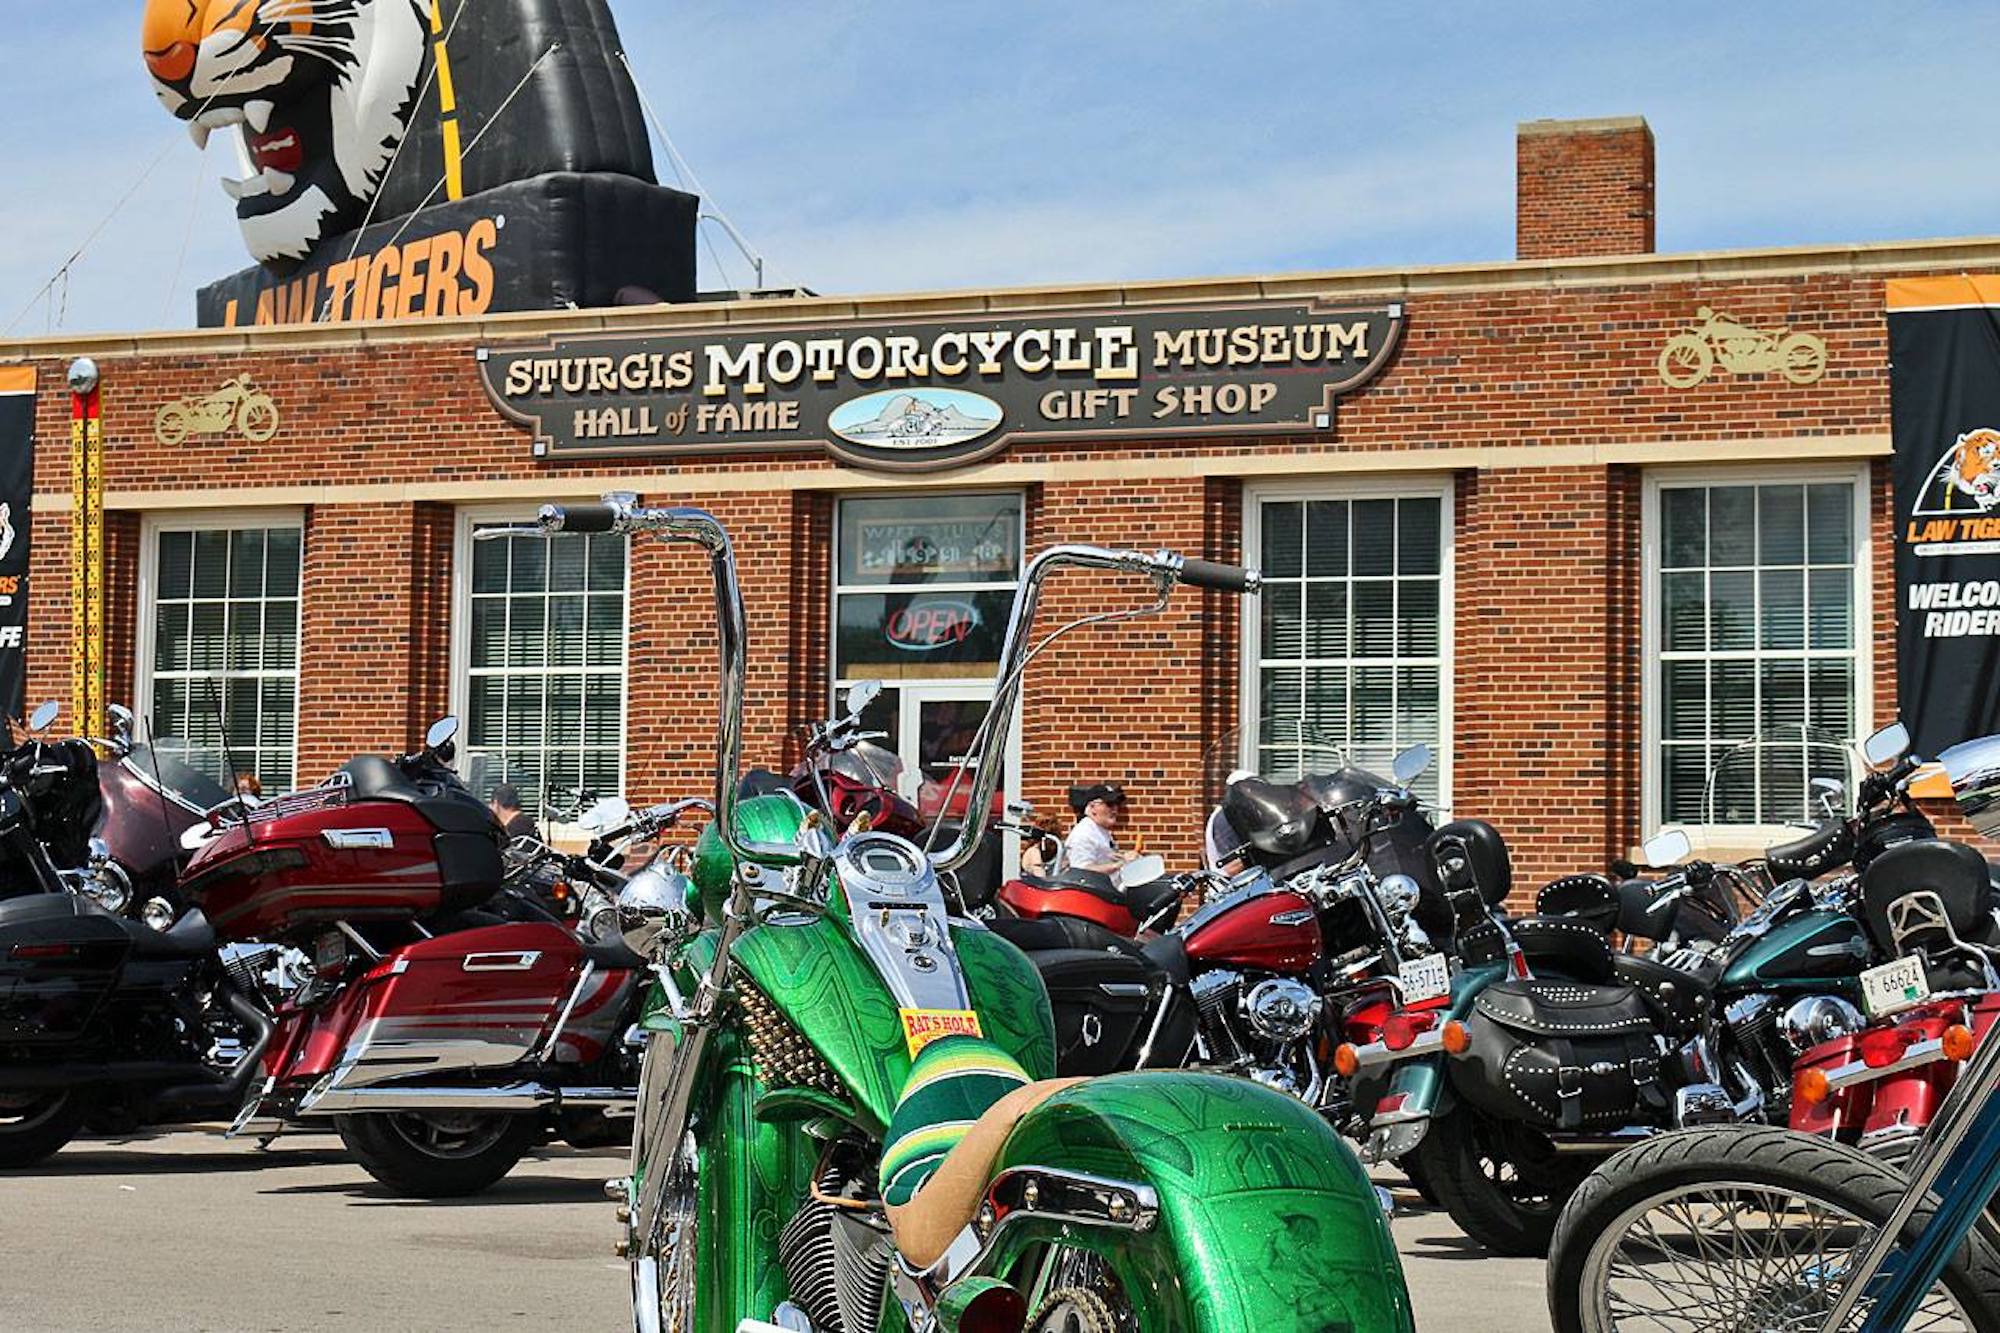 The Sturgis Motorcycle Museum Hall of Fame. Media sourced from the Sturgis Motorcycle Museum's Facebook page.